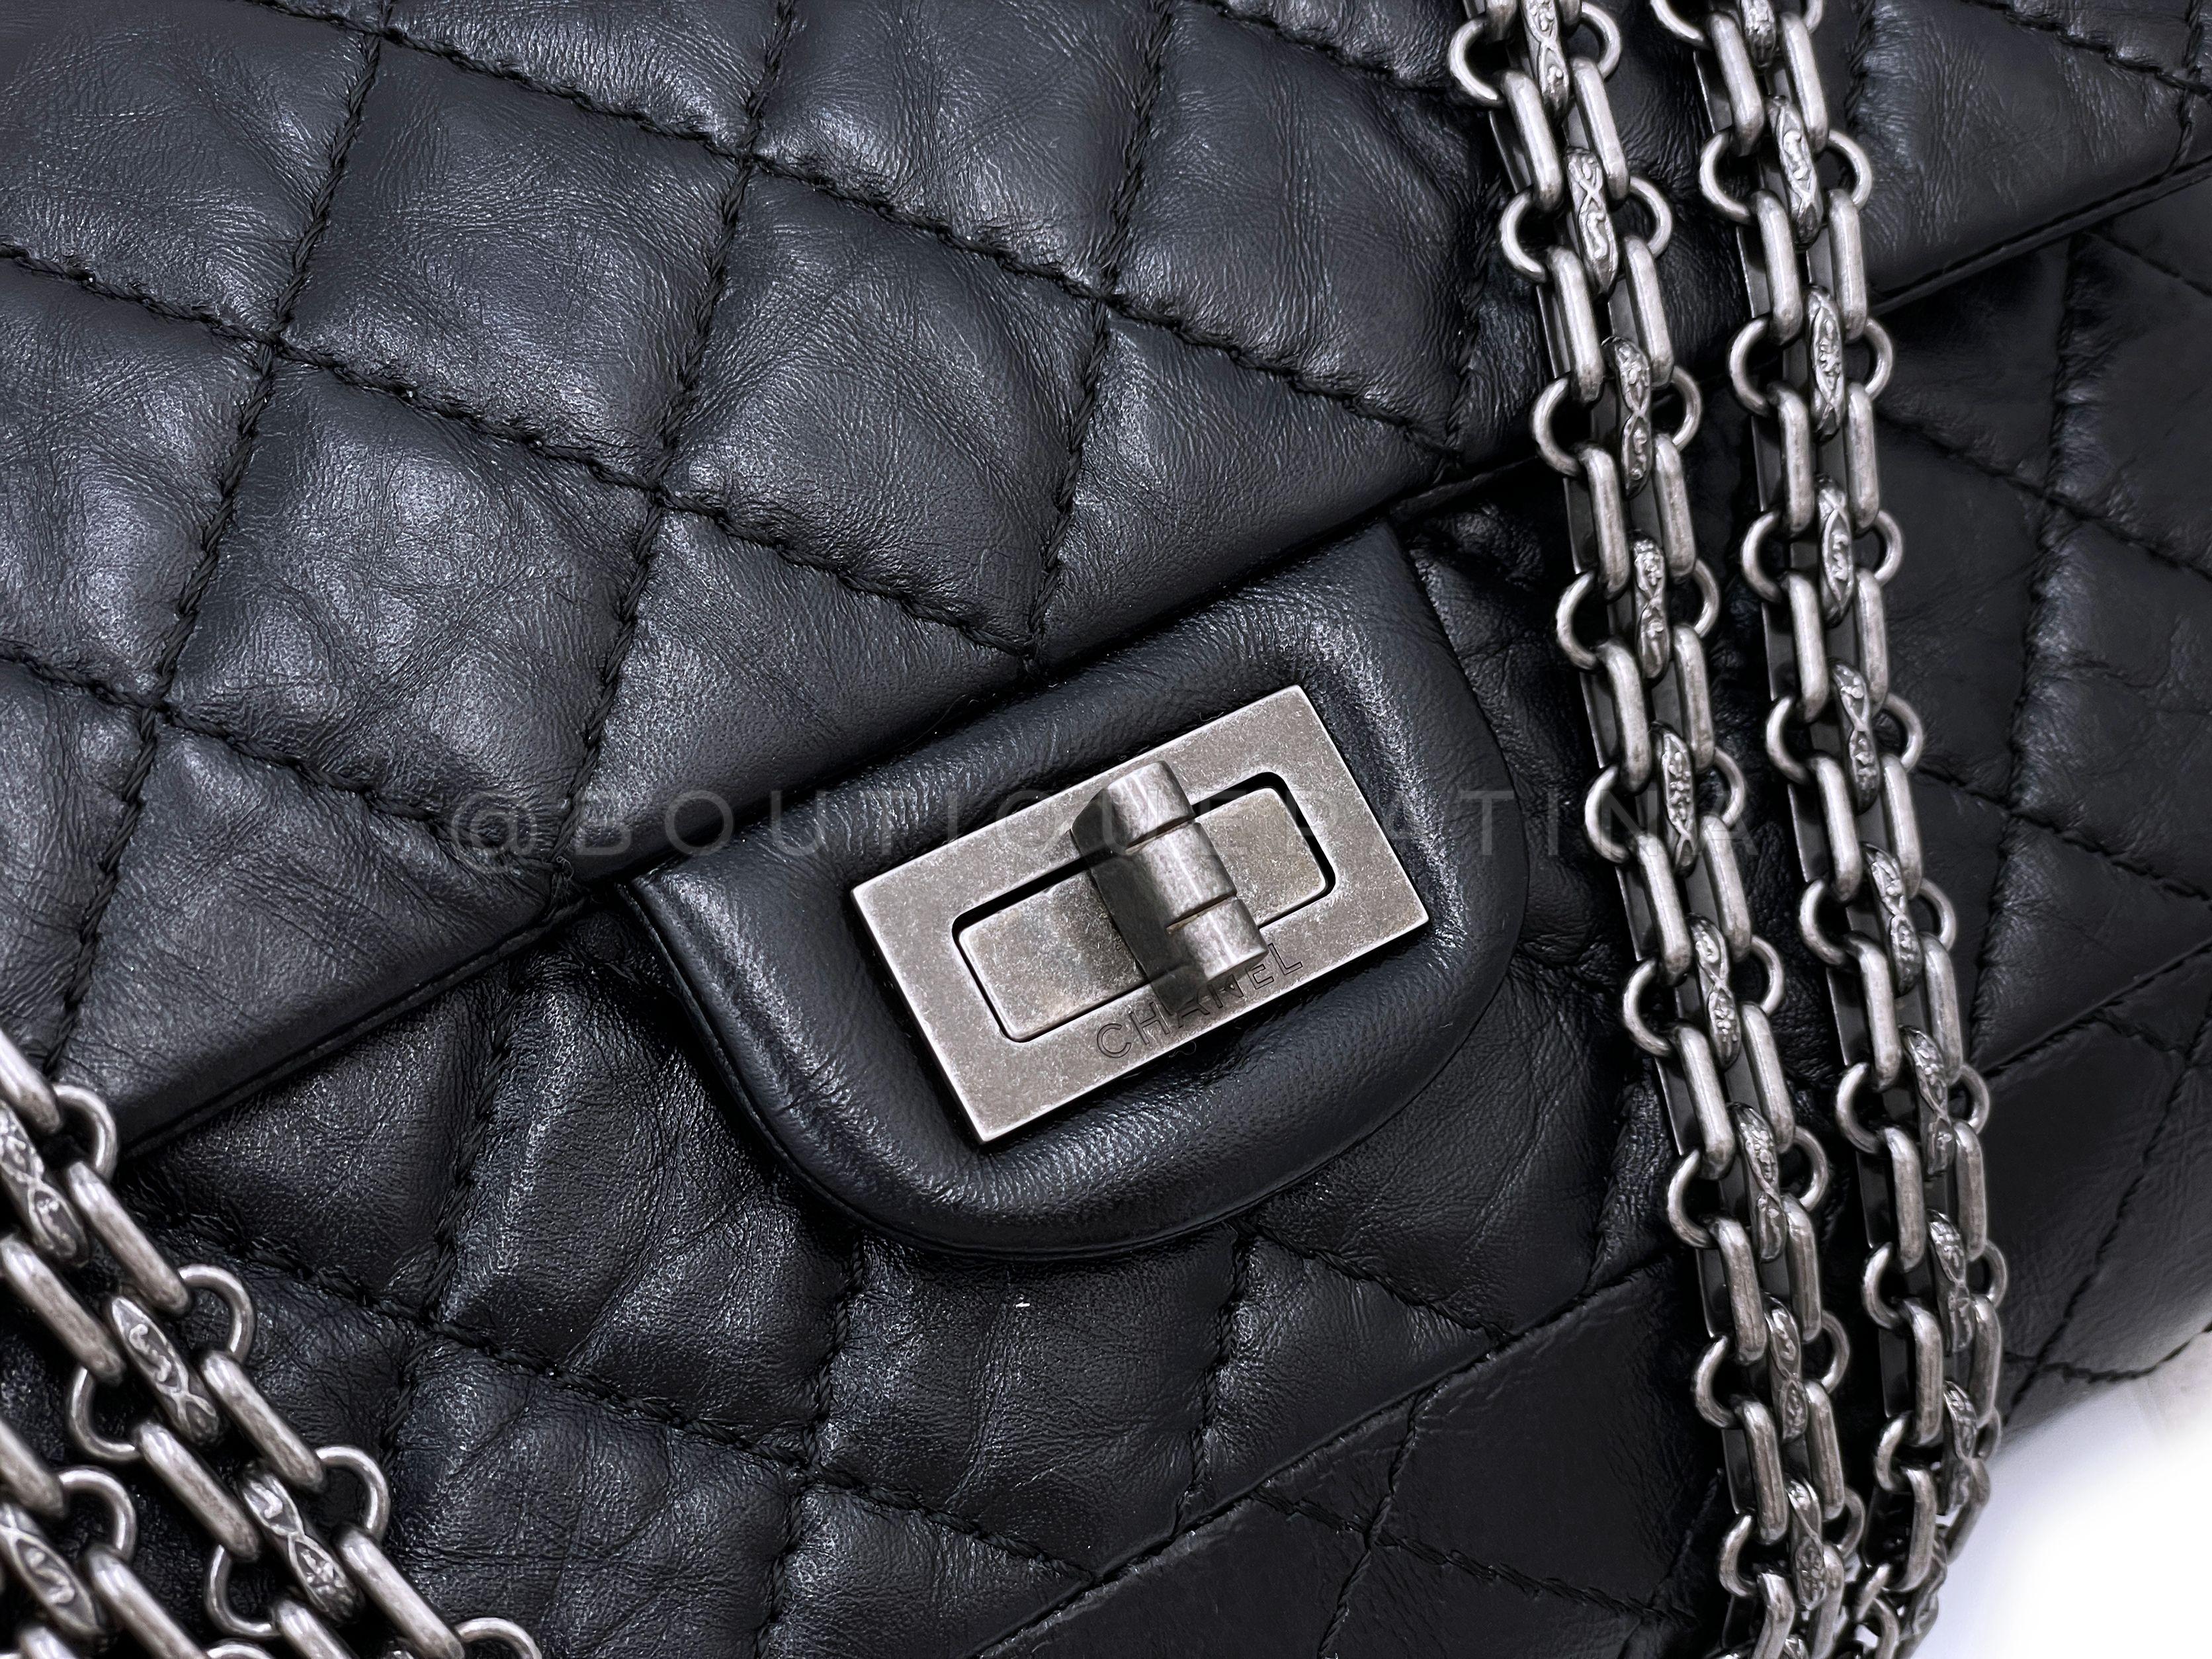 Chanel Black 2.55 Reissue Classic Double Flap Bag RHW 225 66892 For Sale 4